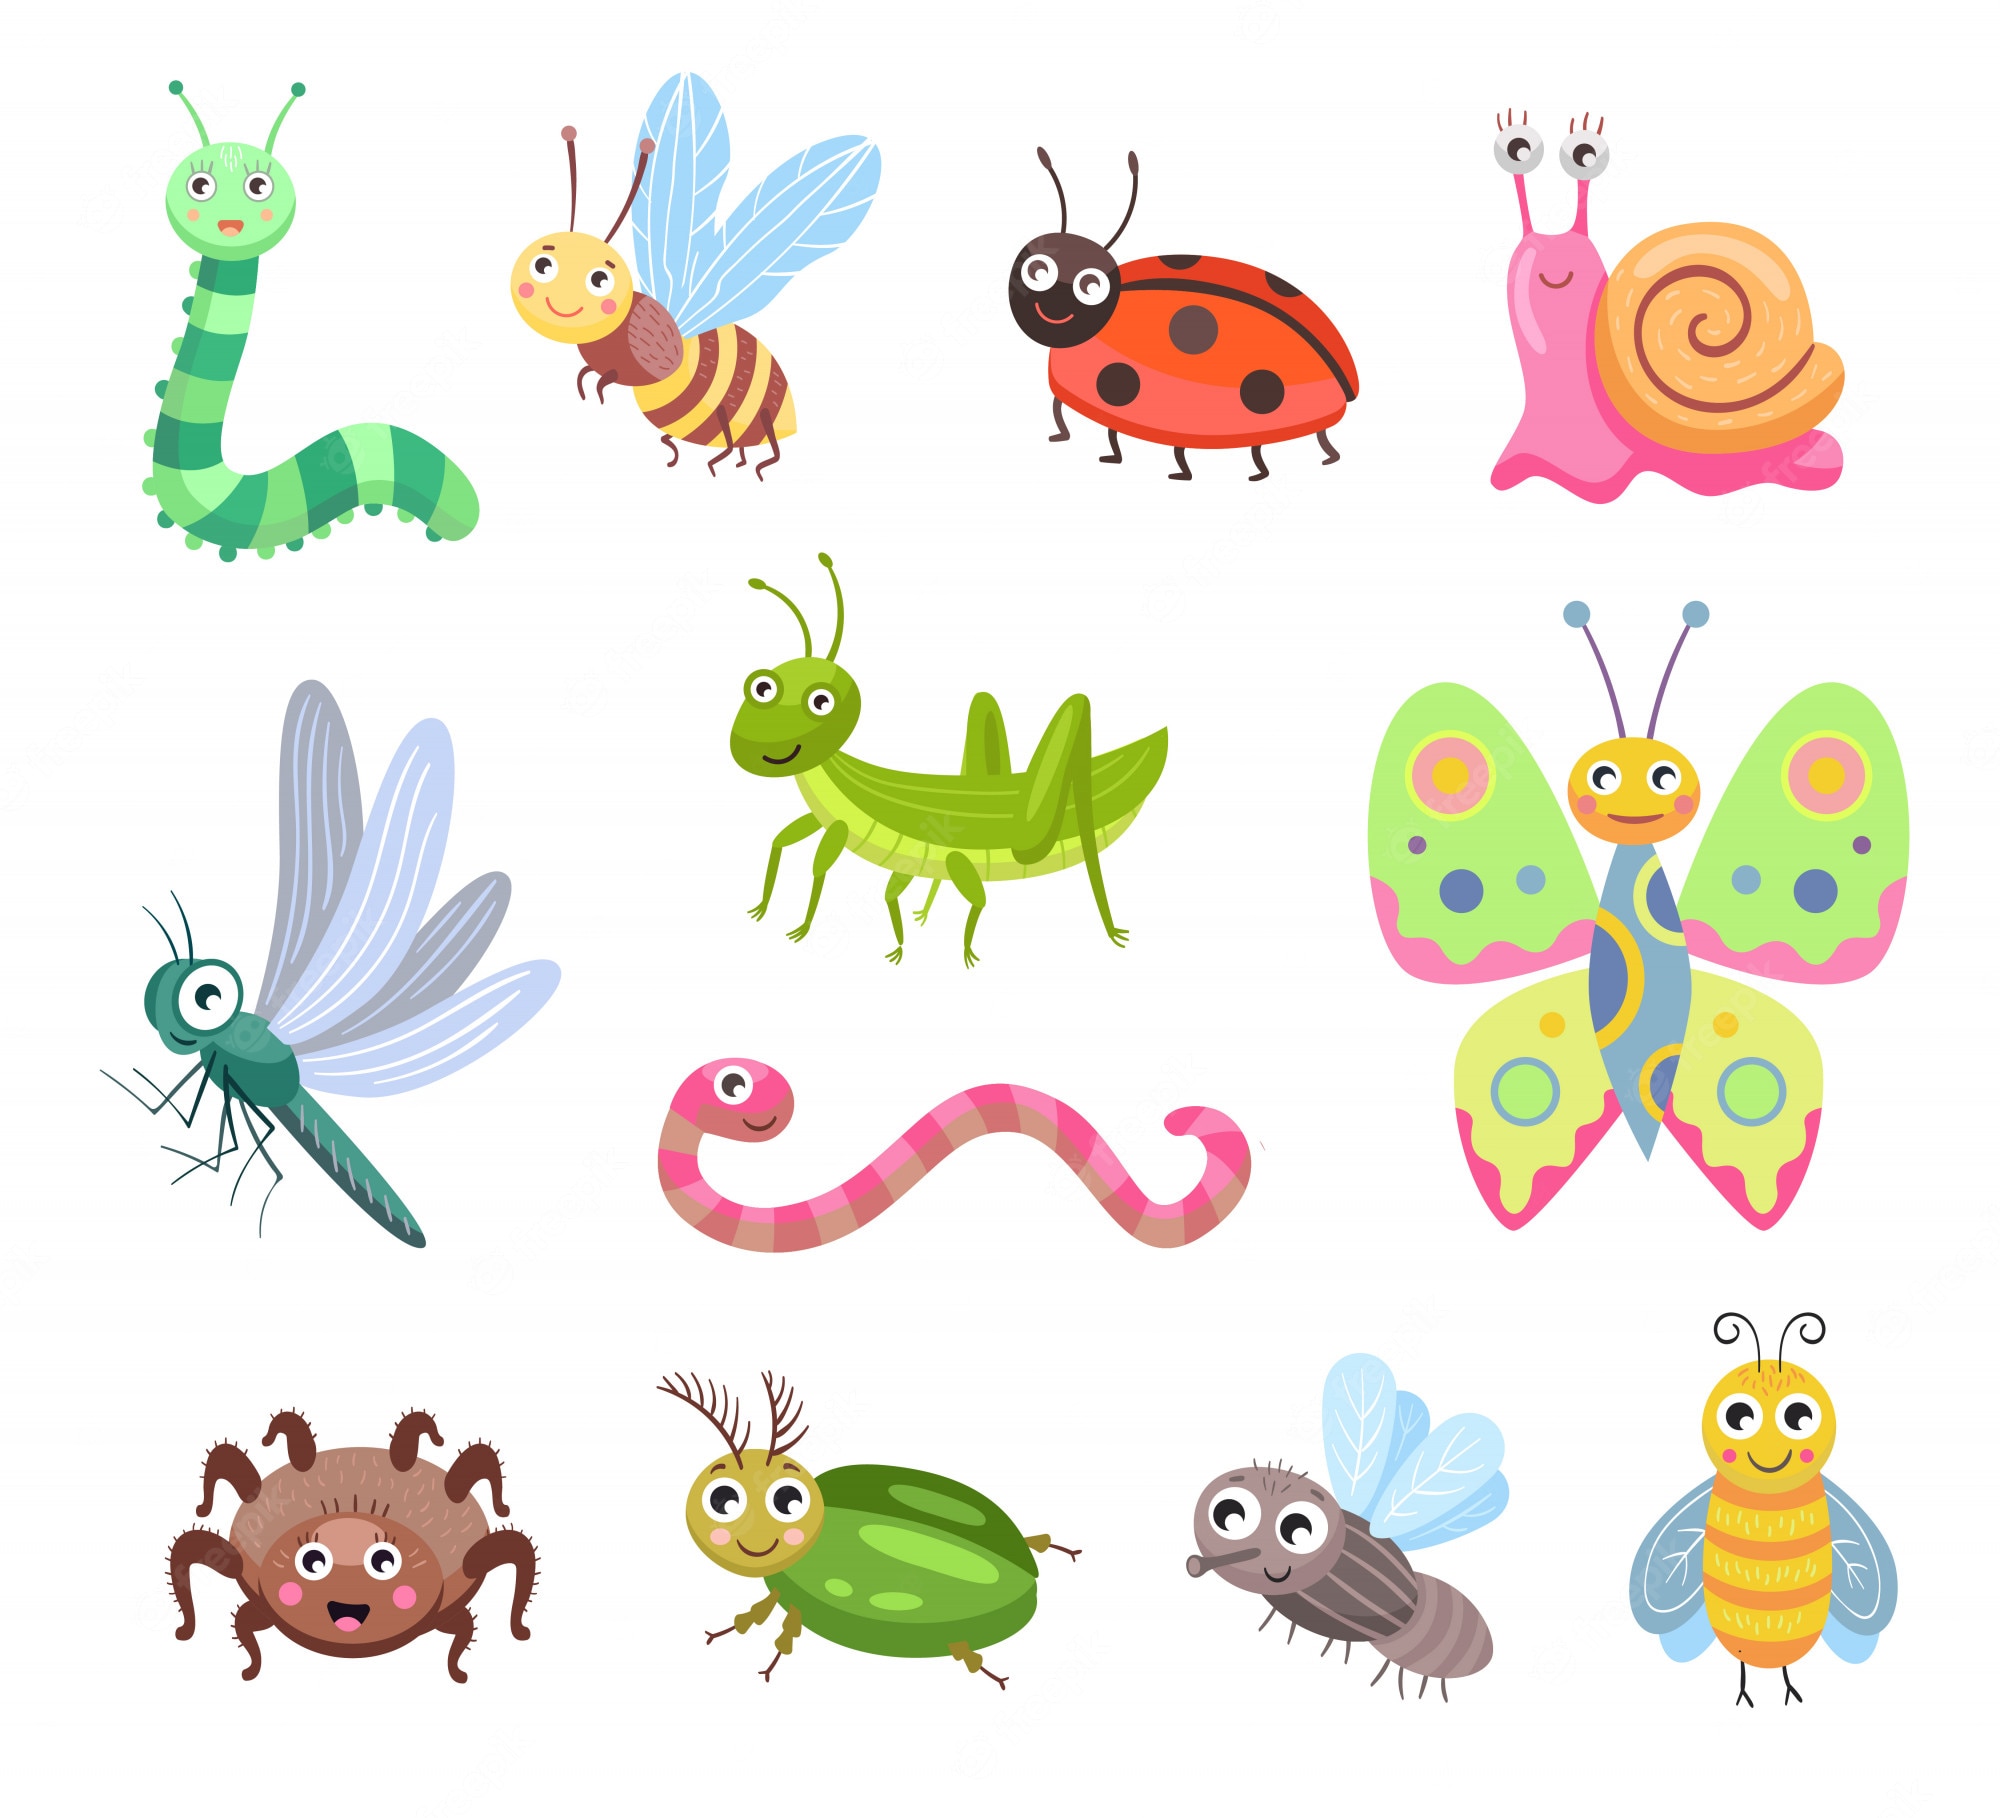 Bugs Cartoon Images Wallpapers